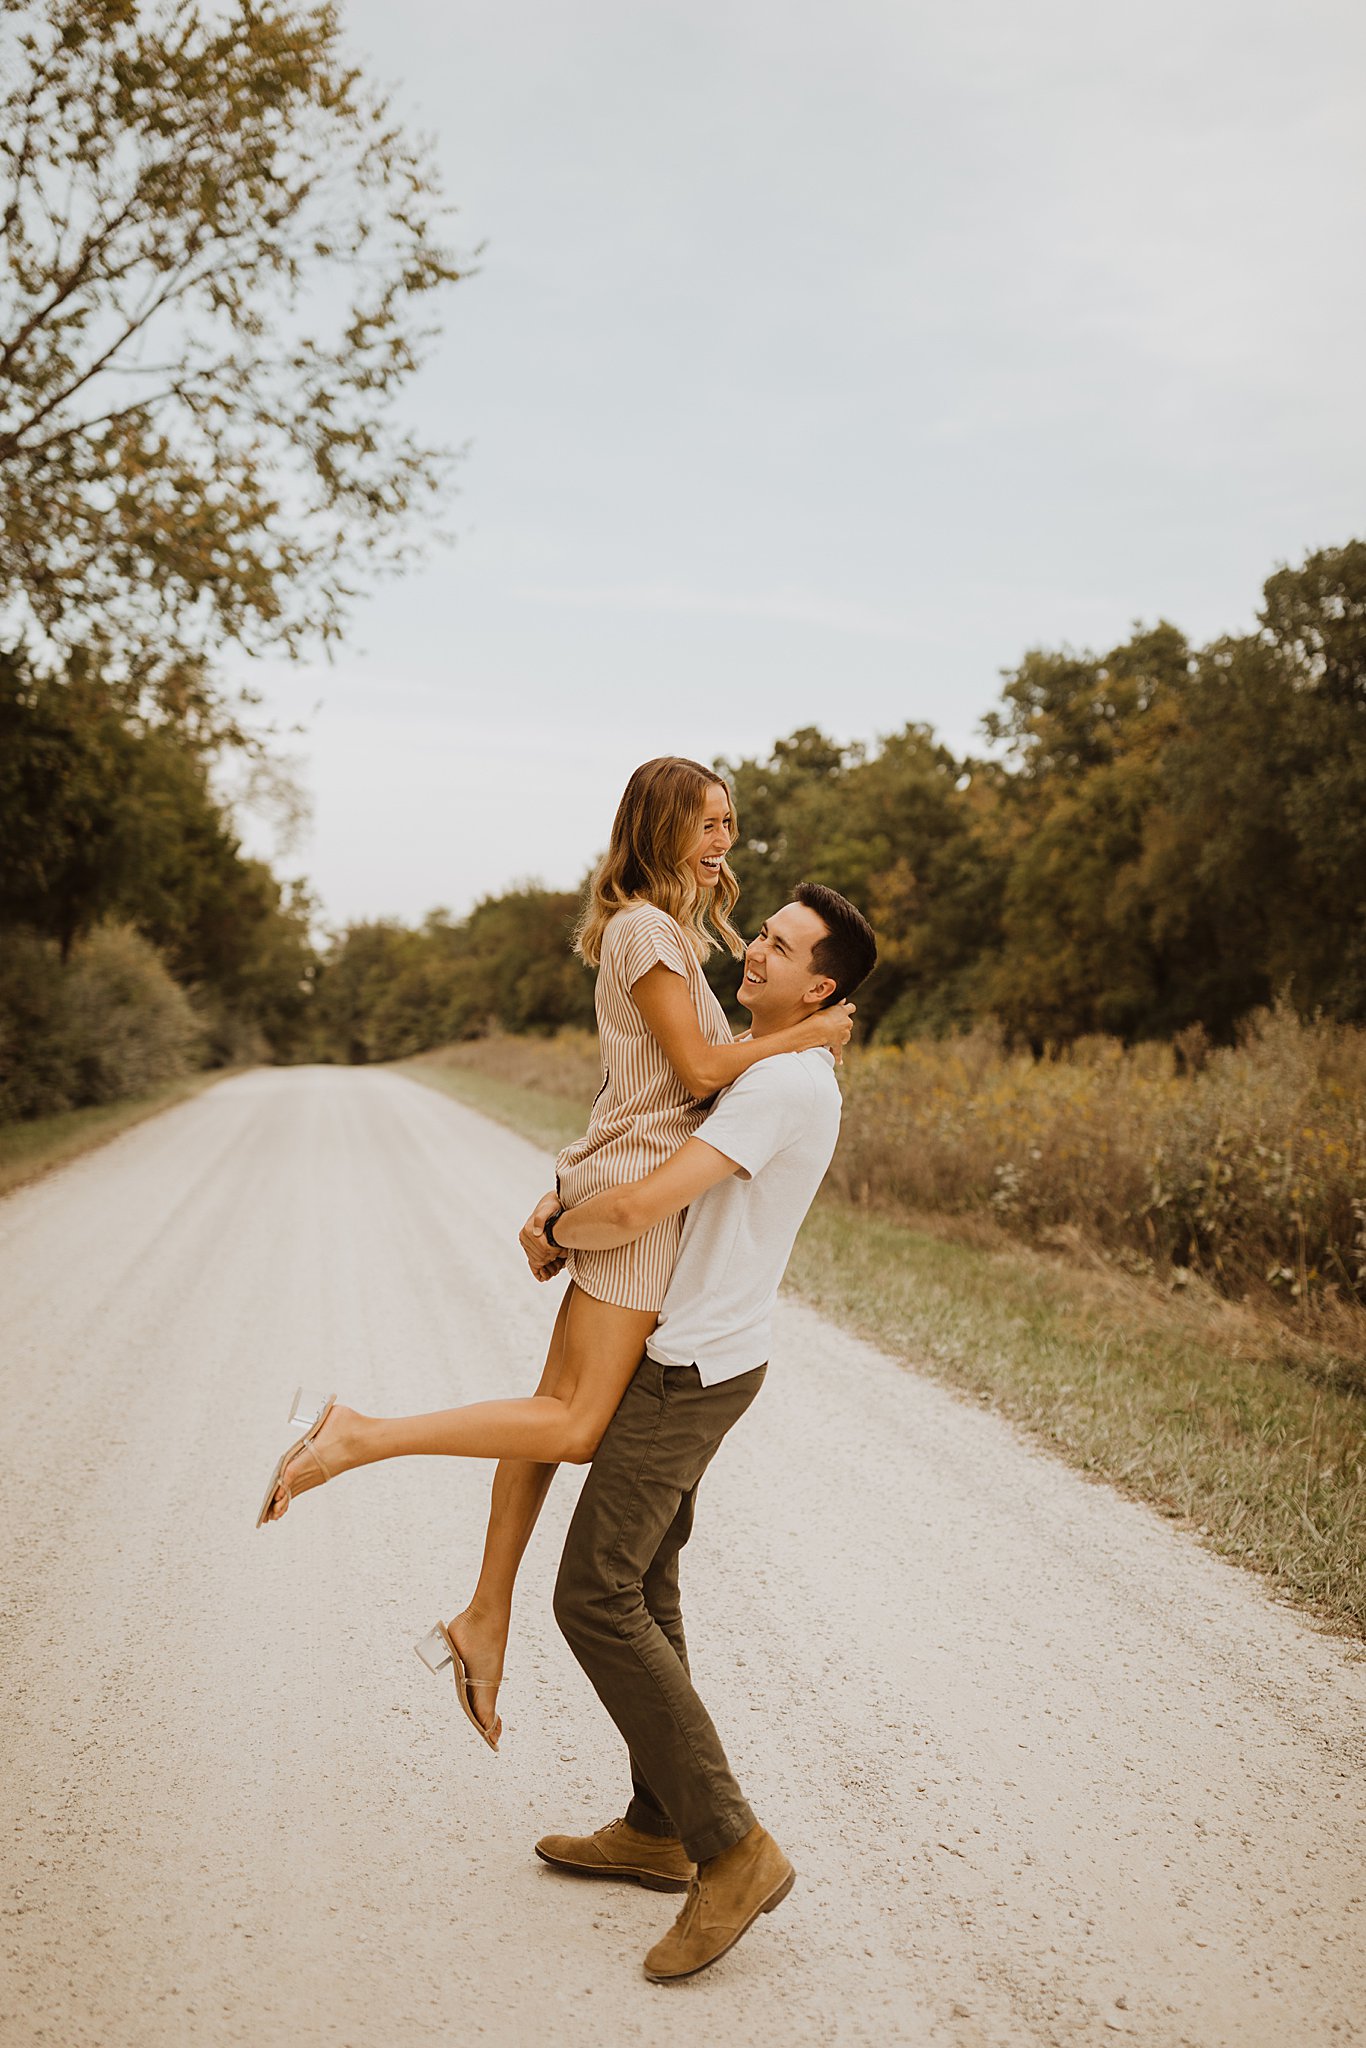 Couple twirling around on a gravel road in St. Louis